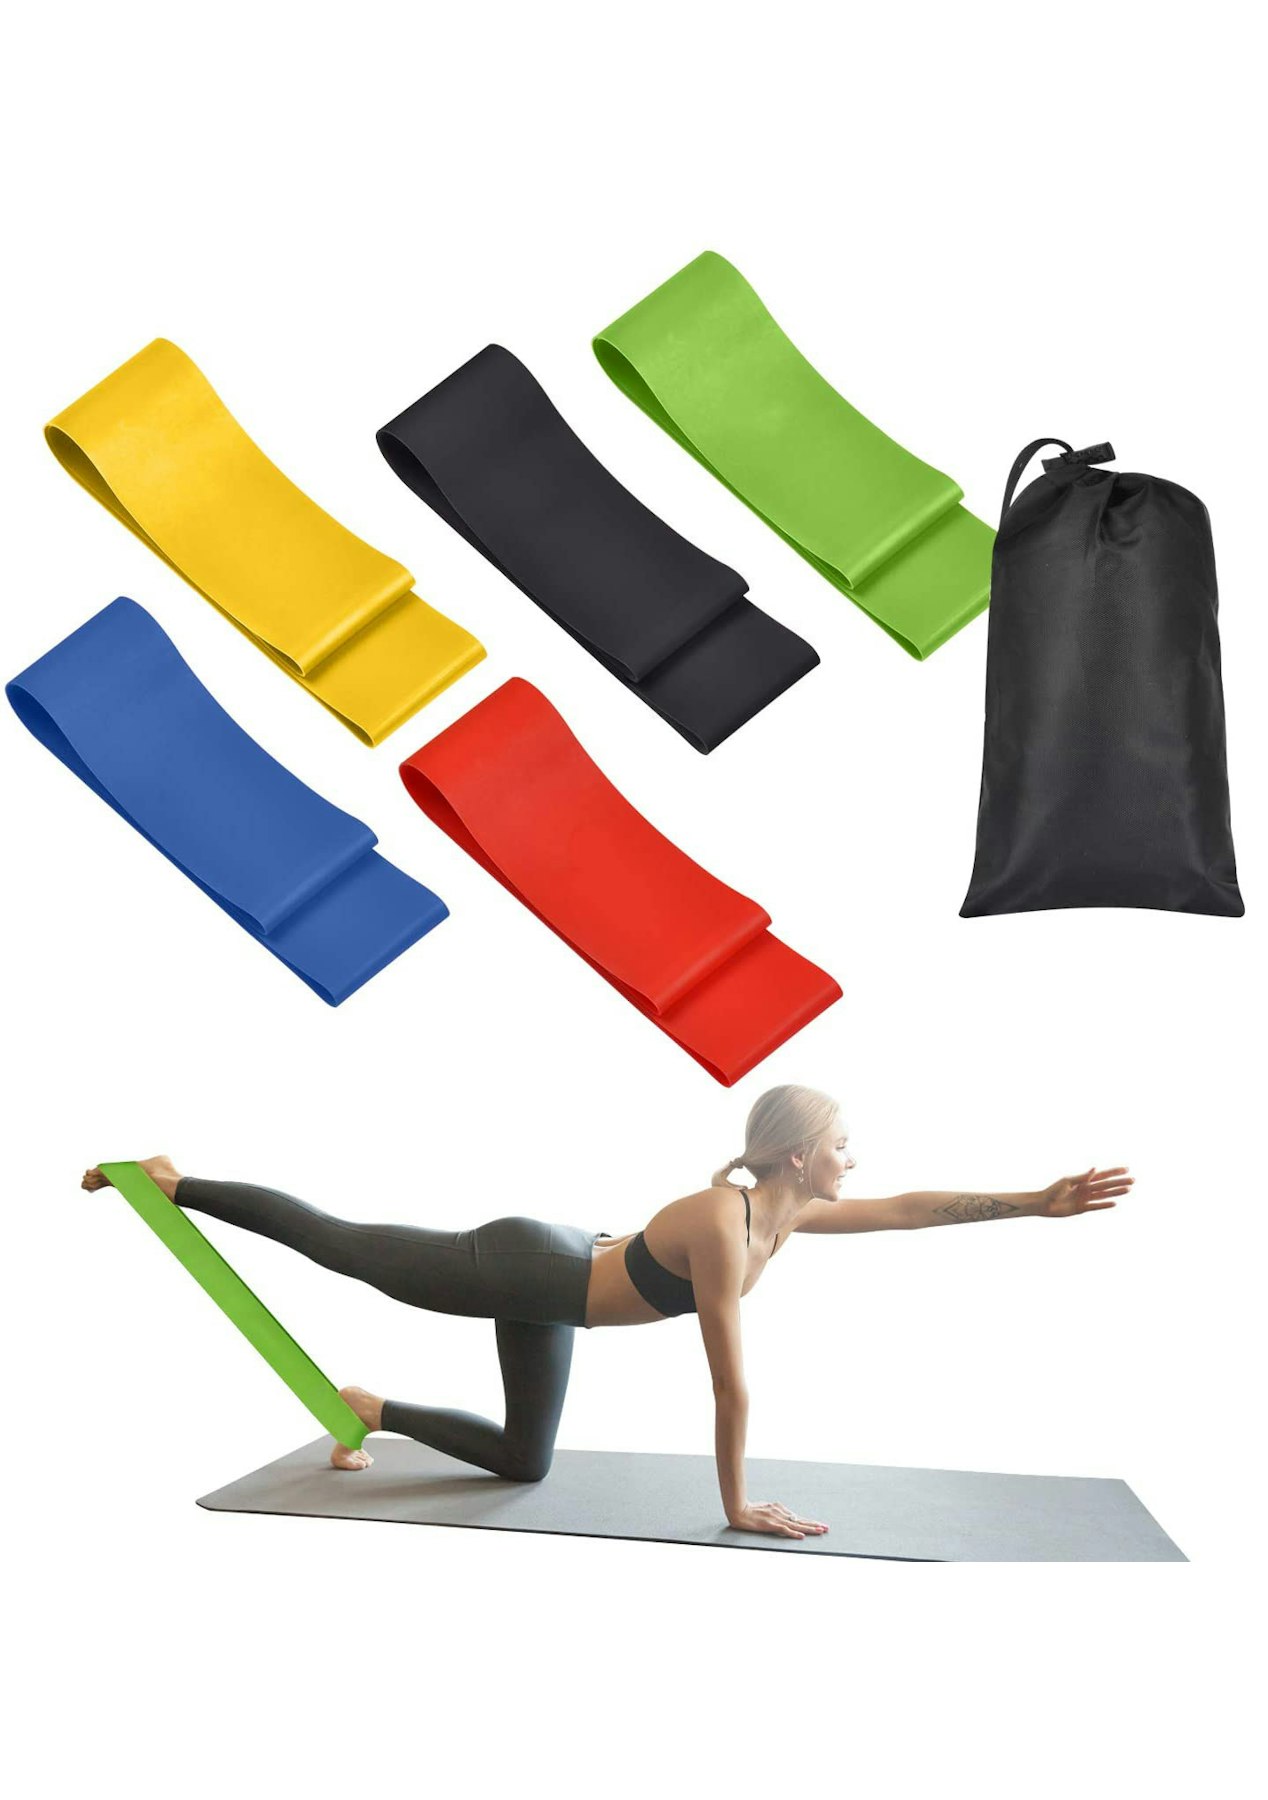 Details about   Resistance Bands Loop Set Exercise Sports Fitness Home Gym Yoga Pilates Latex 